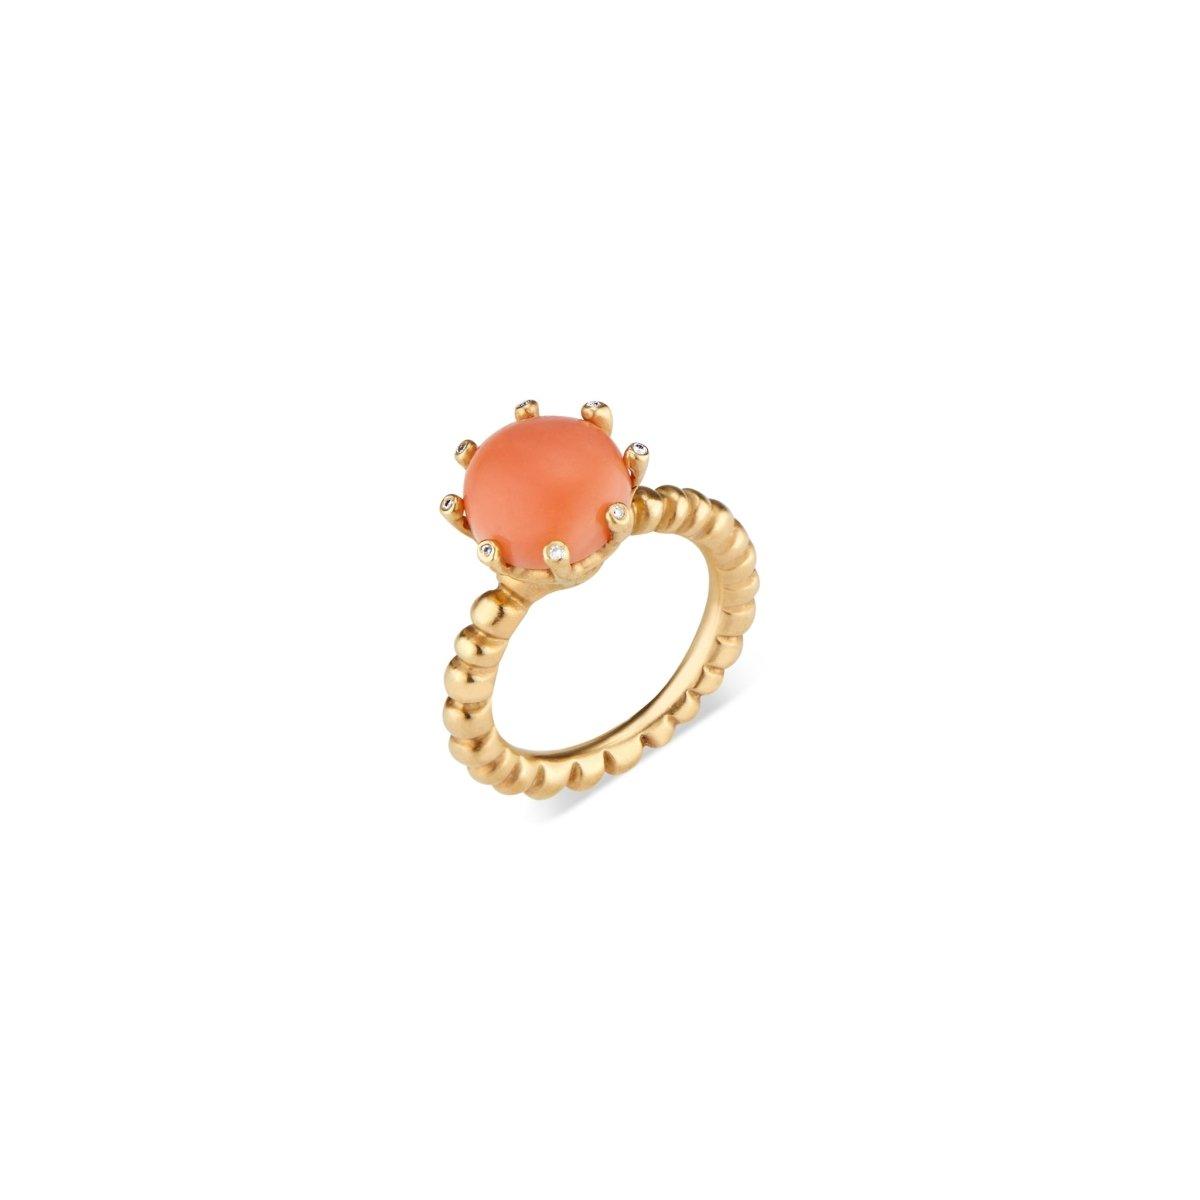 Coral Crown Ring - Nataly Aponte